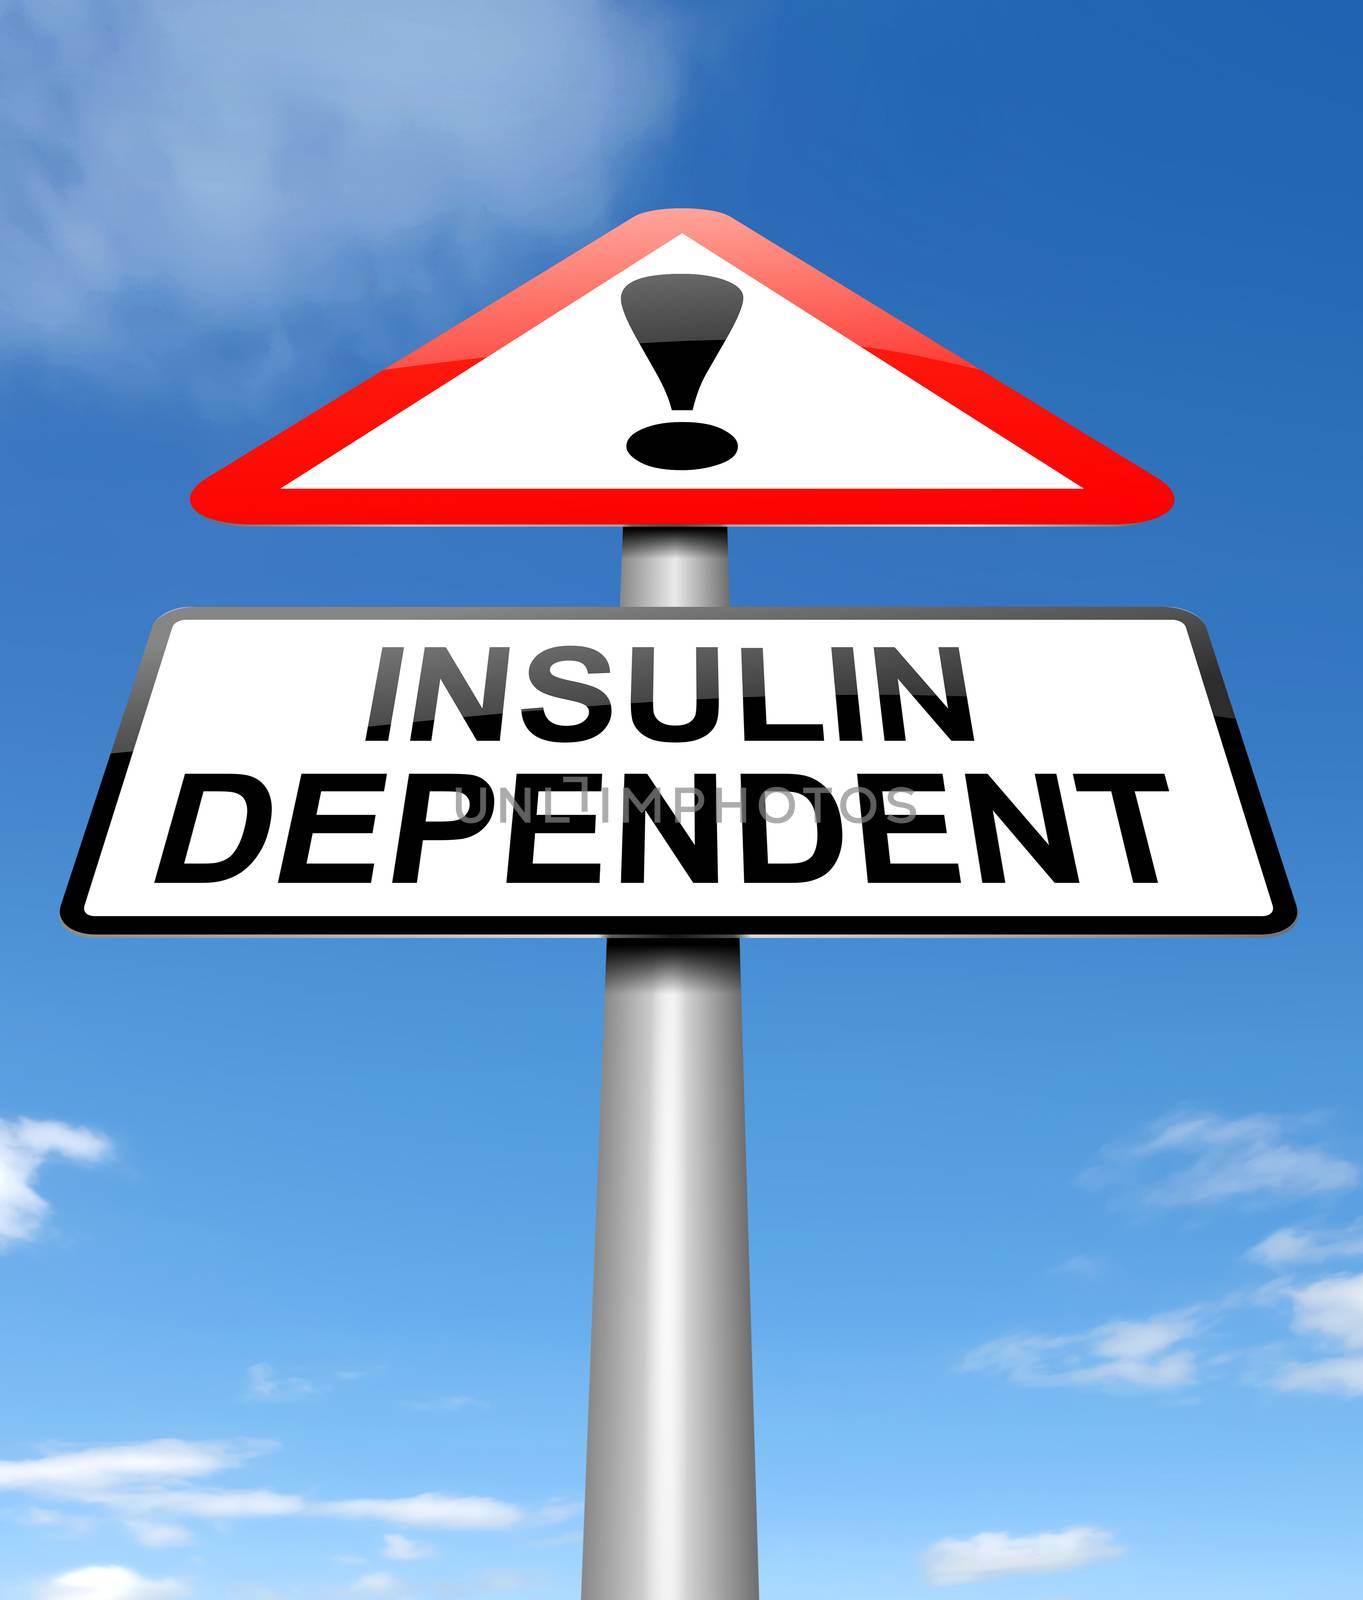 Illustration depicting a sign with an insulin dependency concept.